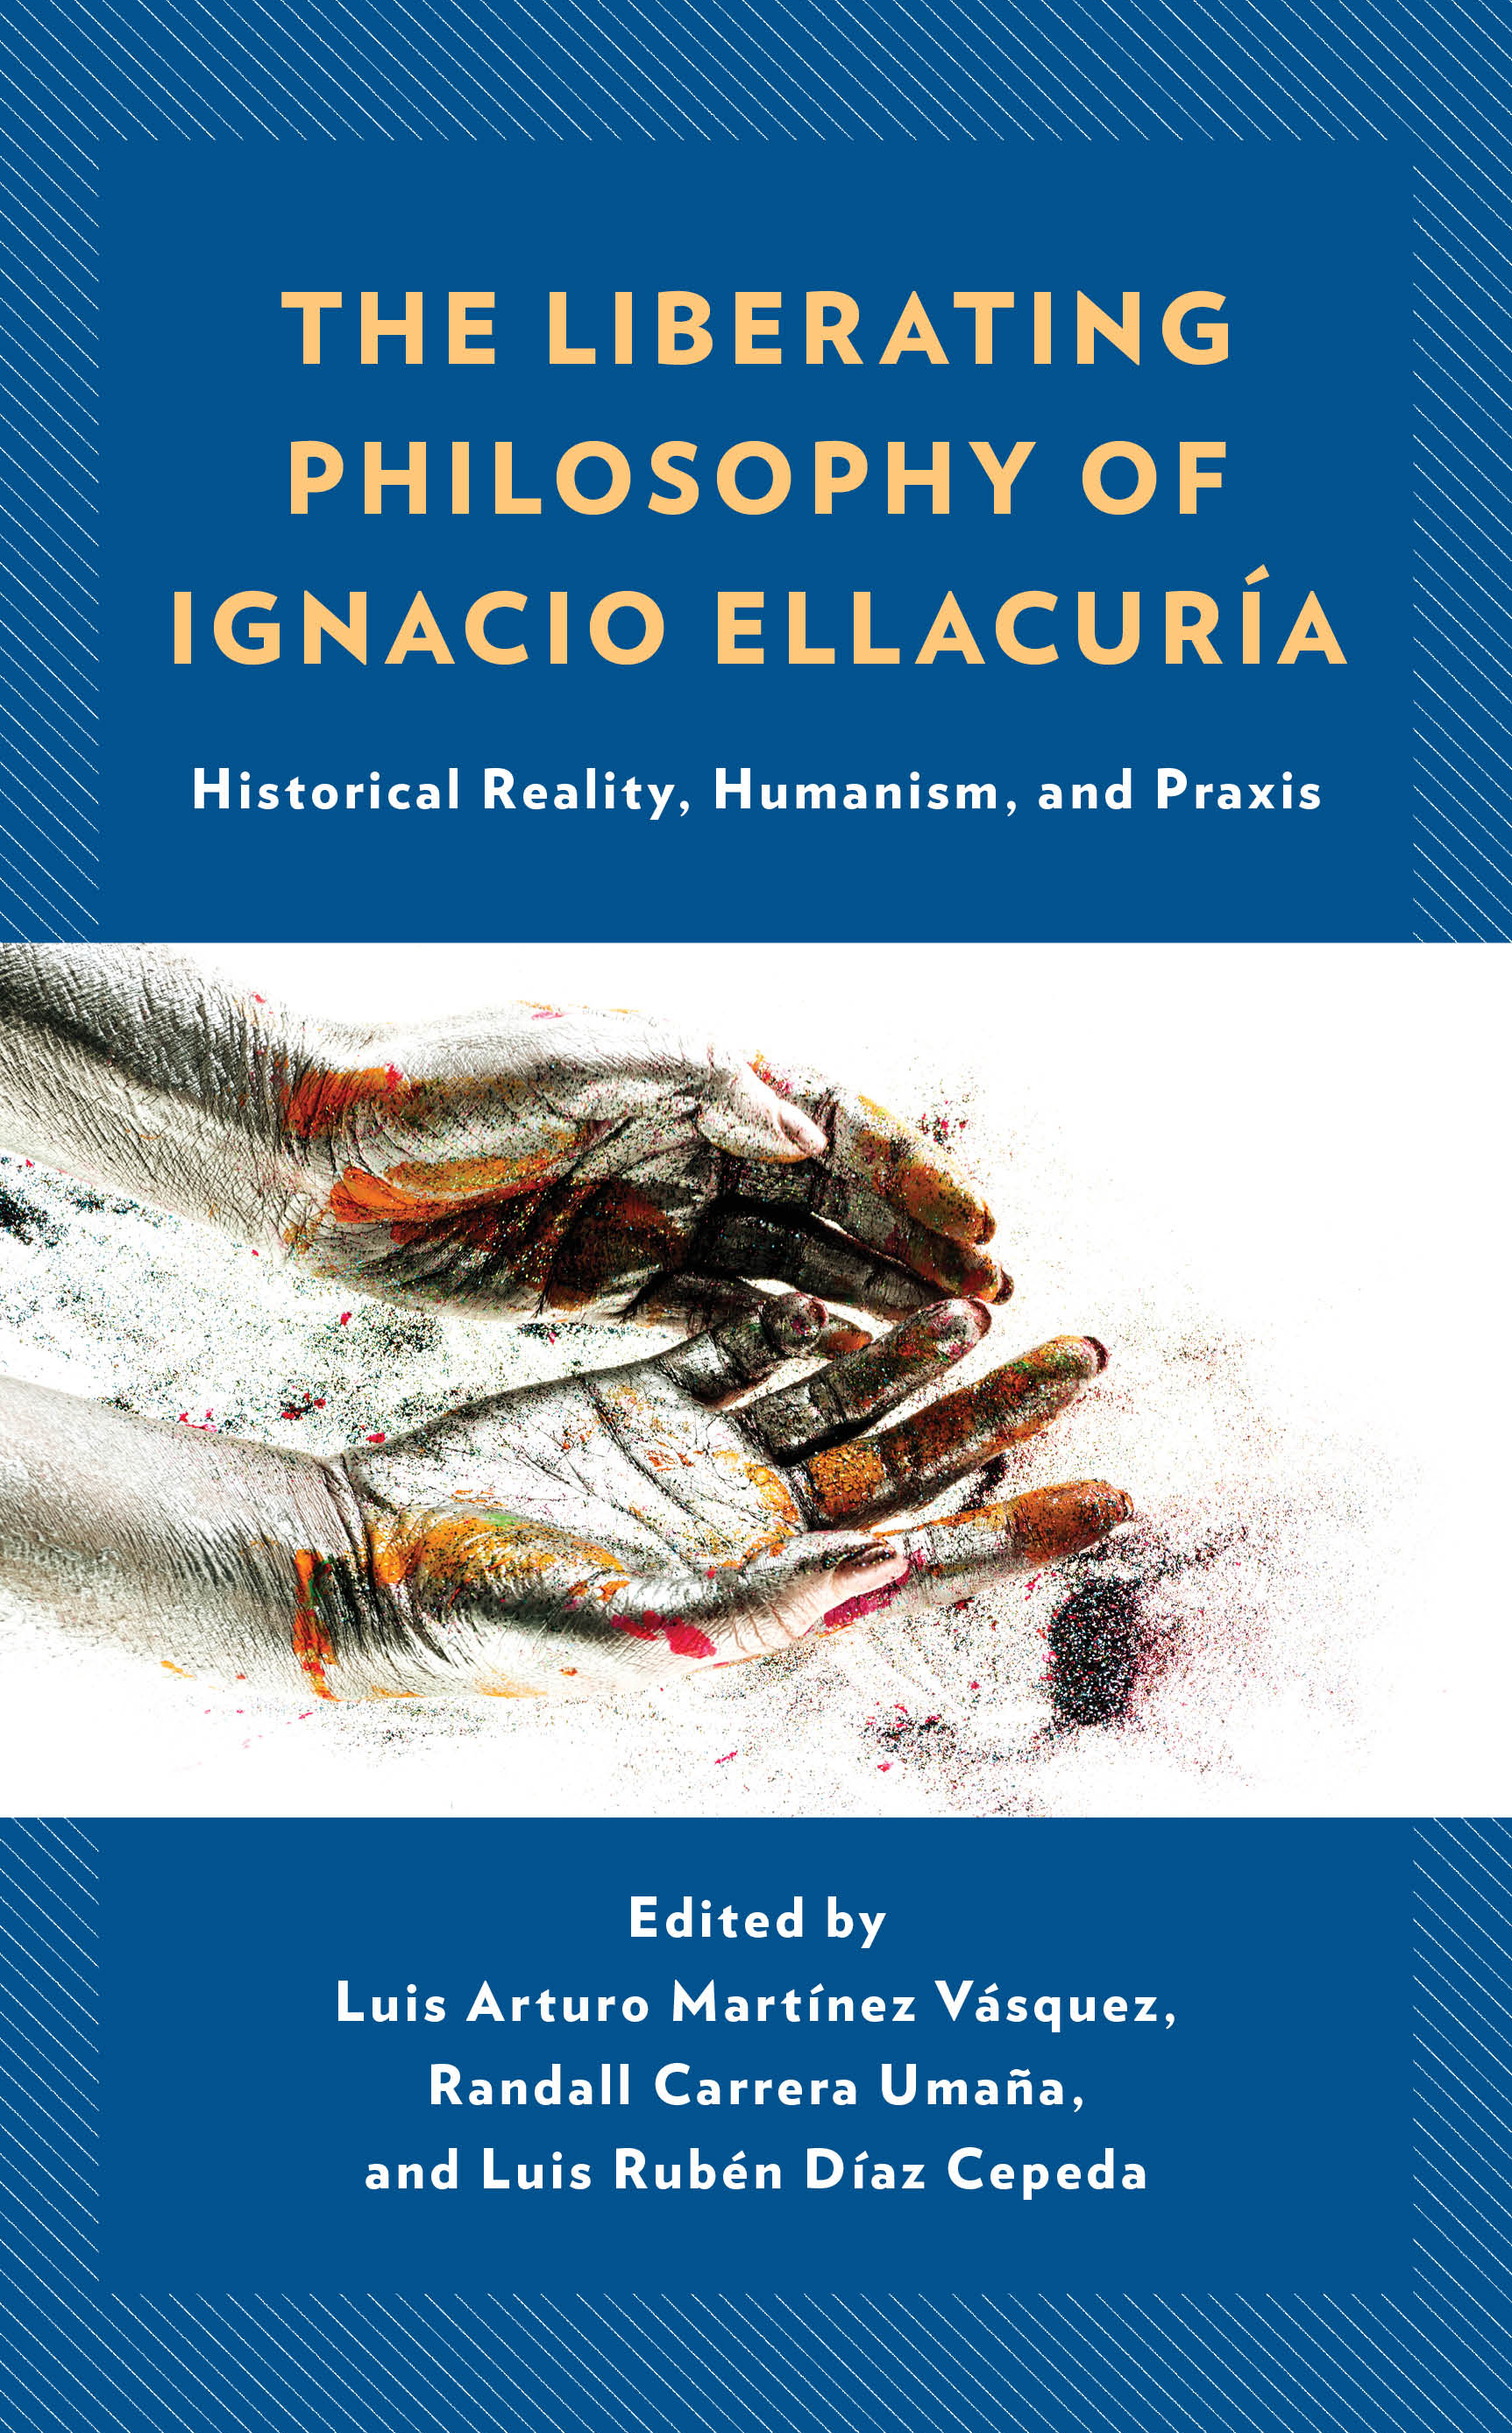 The Liberating Philosophy of Ignacio Ellacuría: Historical Reality, Humanism, and Praxis